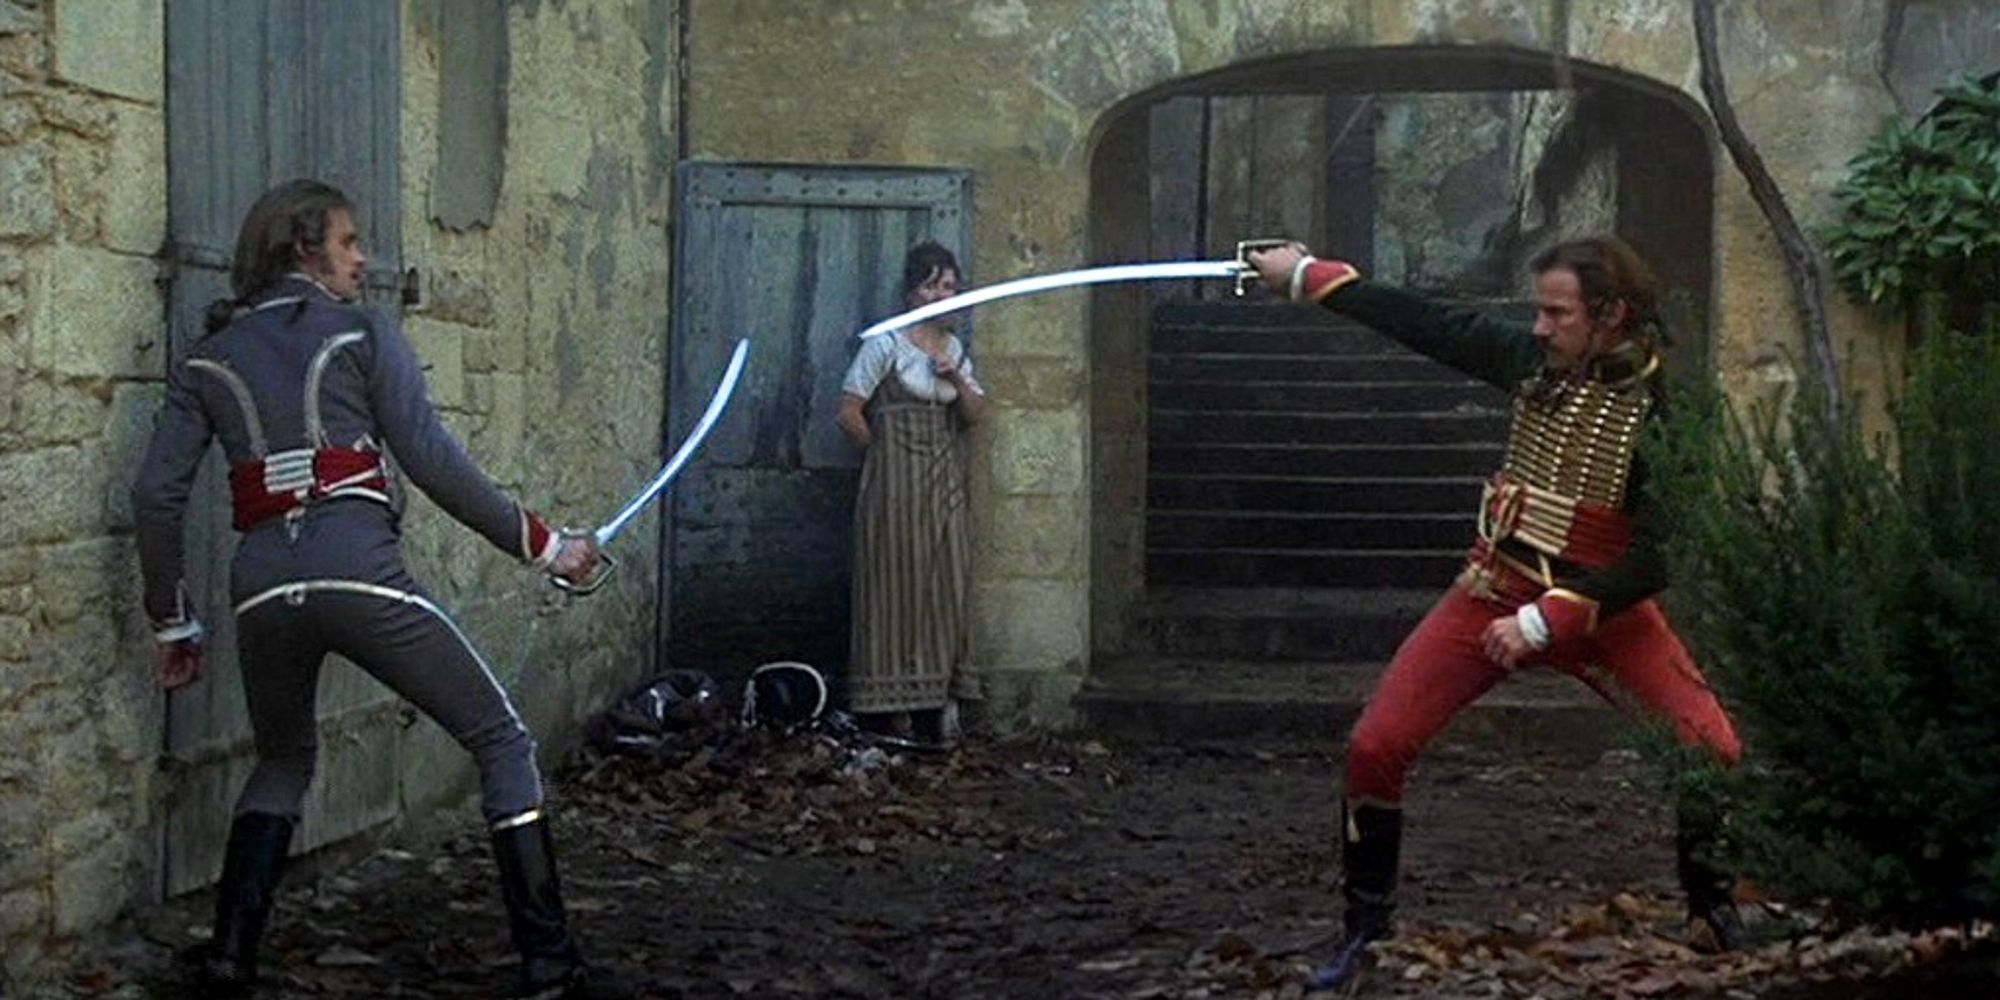 Harvey Keitel and Keith Carradine dueling with Swords in the Duellists